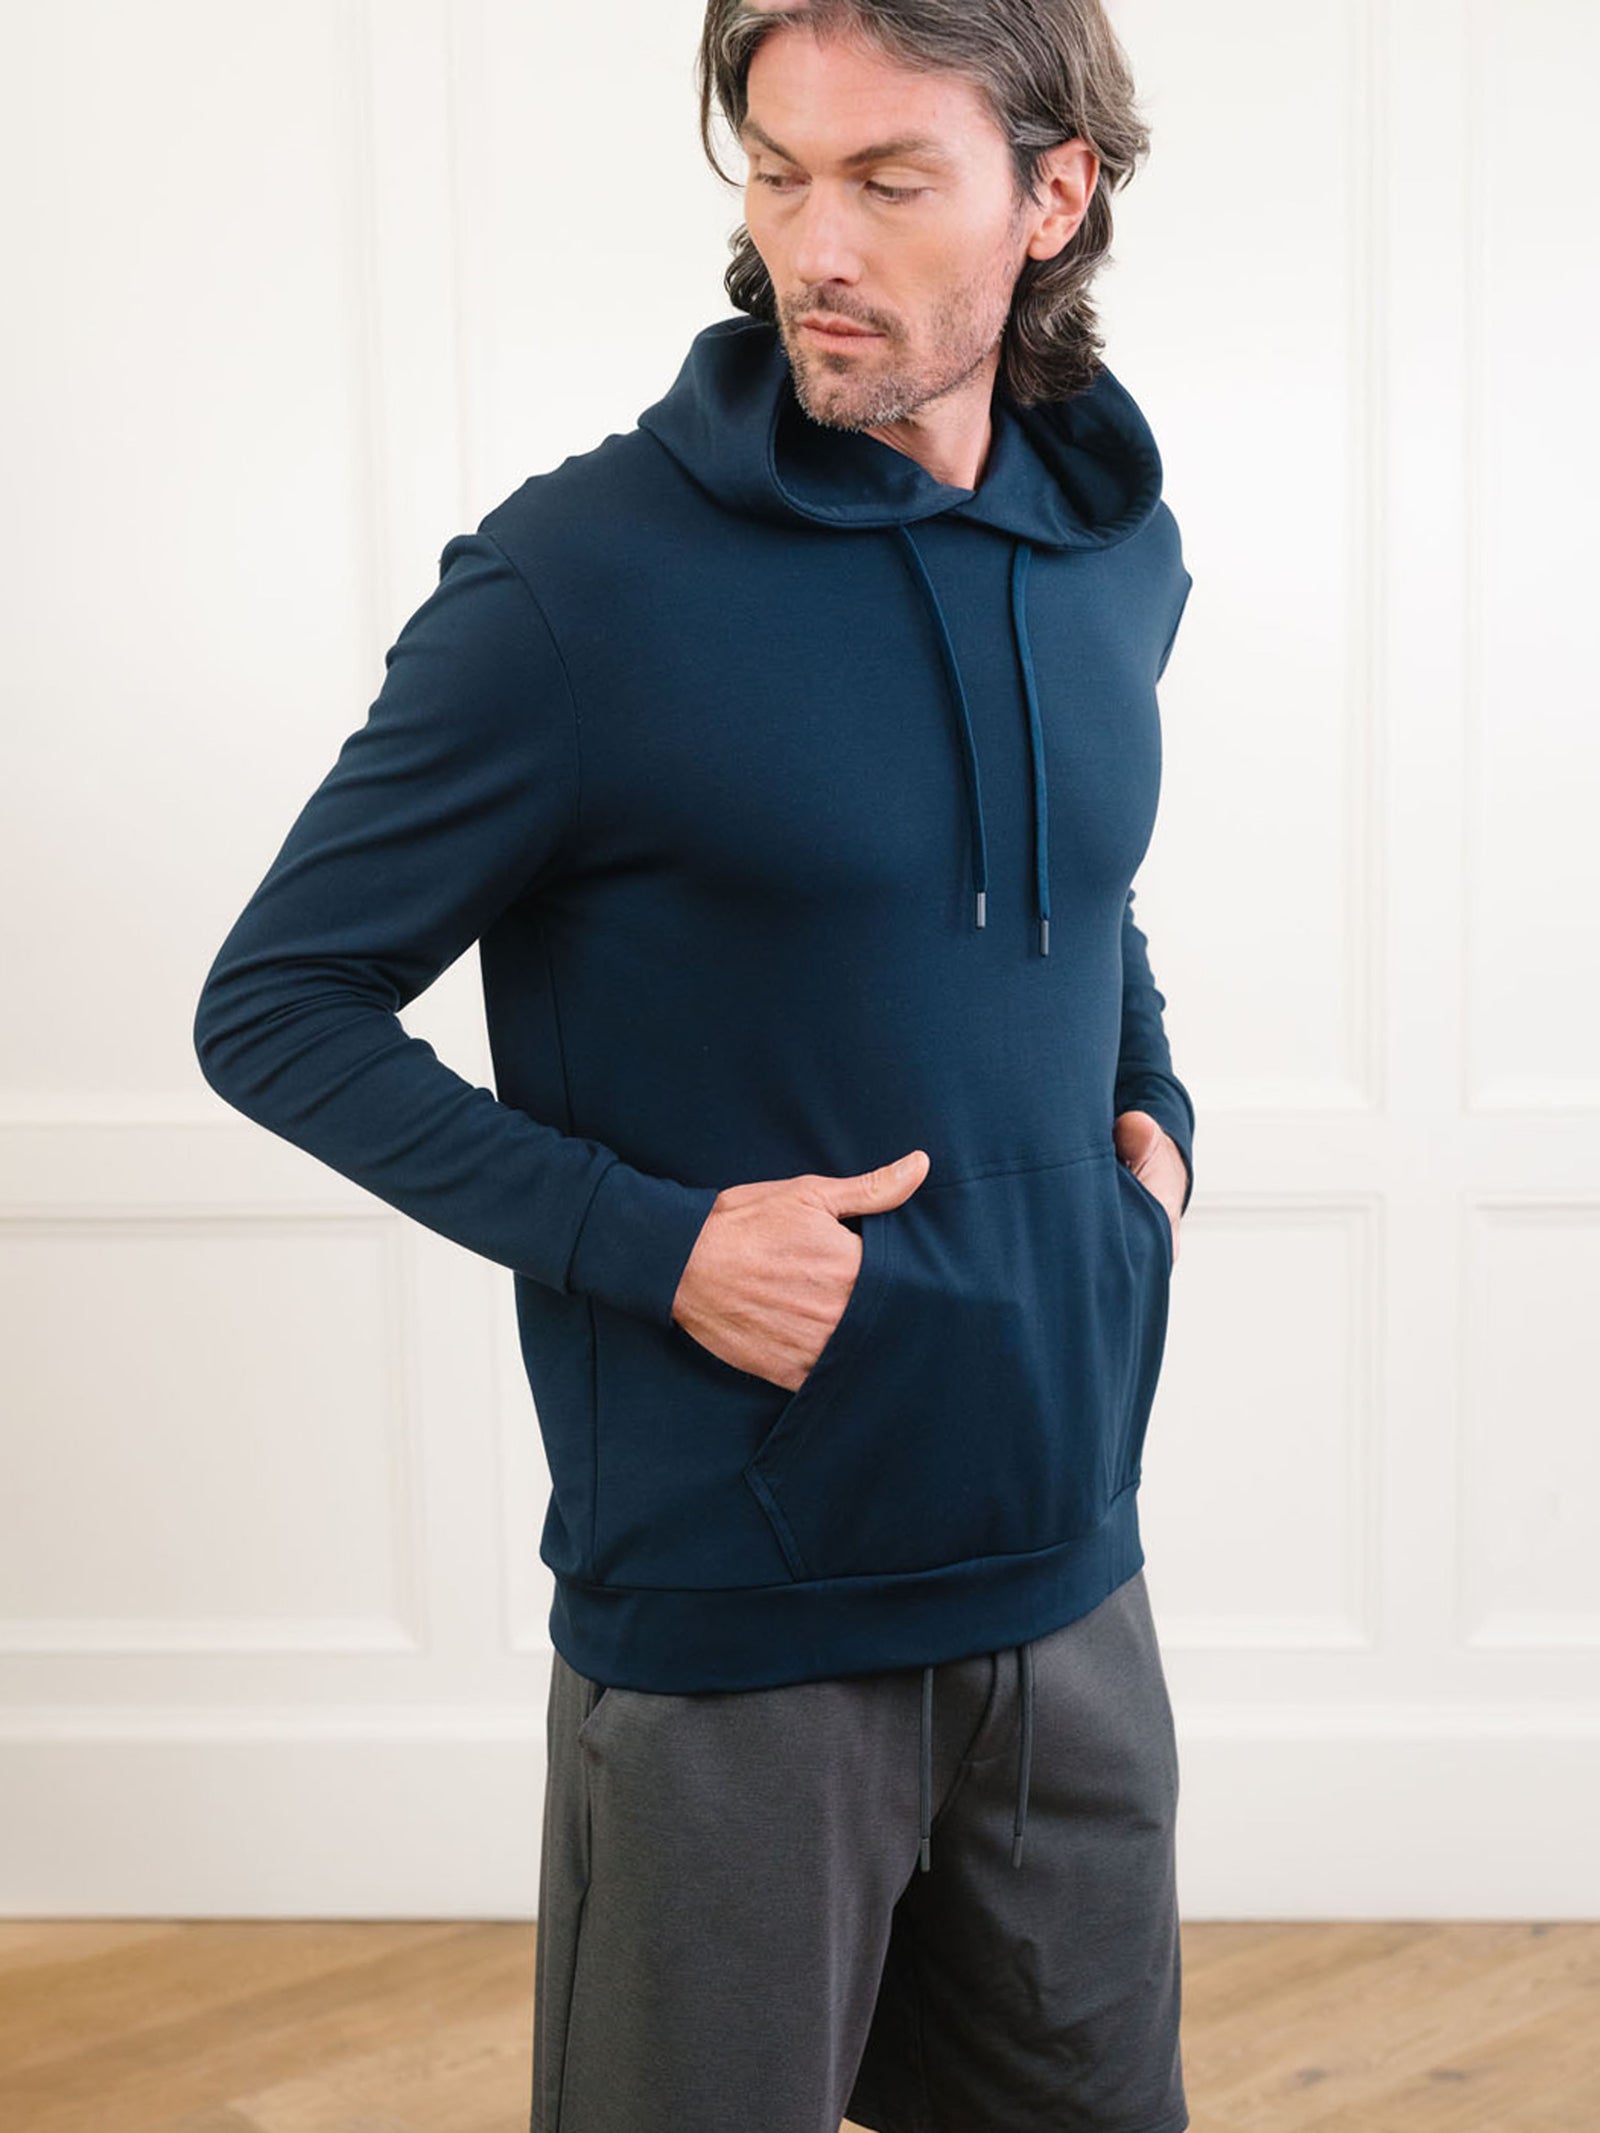 Navy Bamboo Hoodie worn by man standing in front of white background.